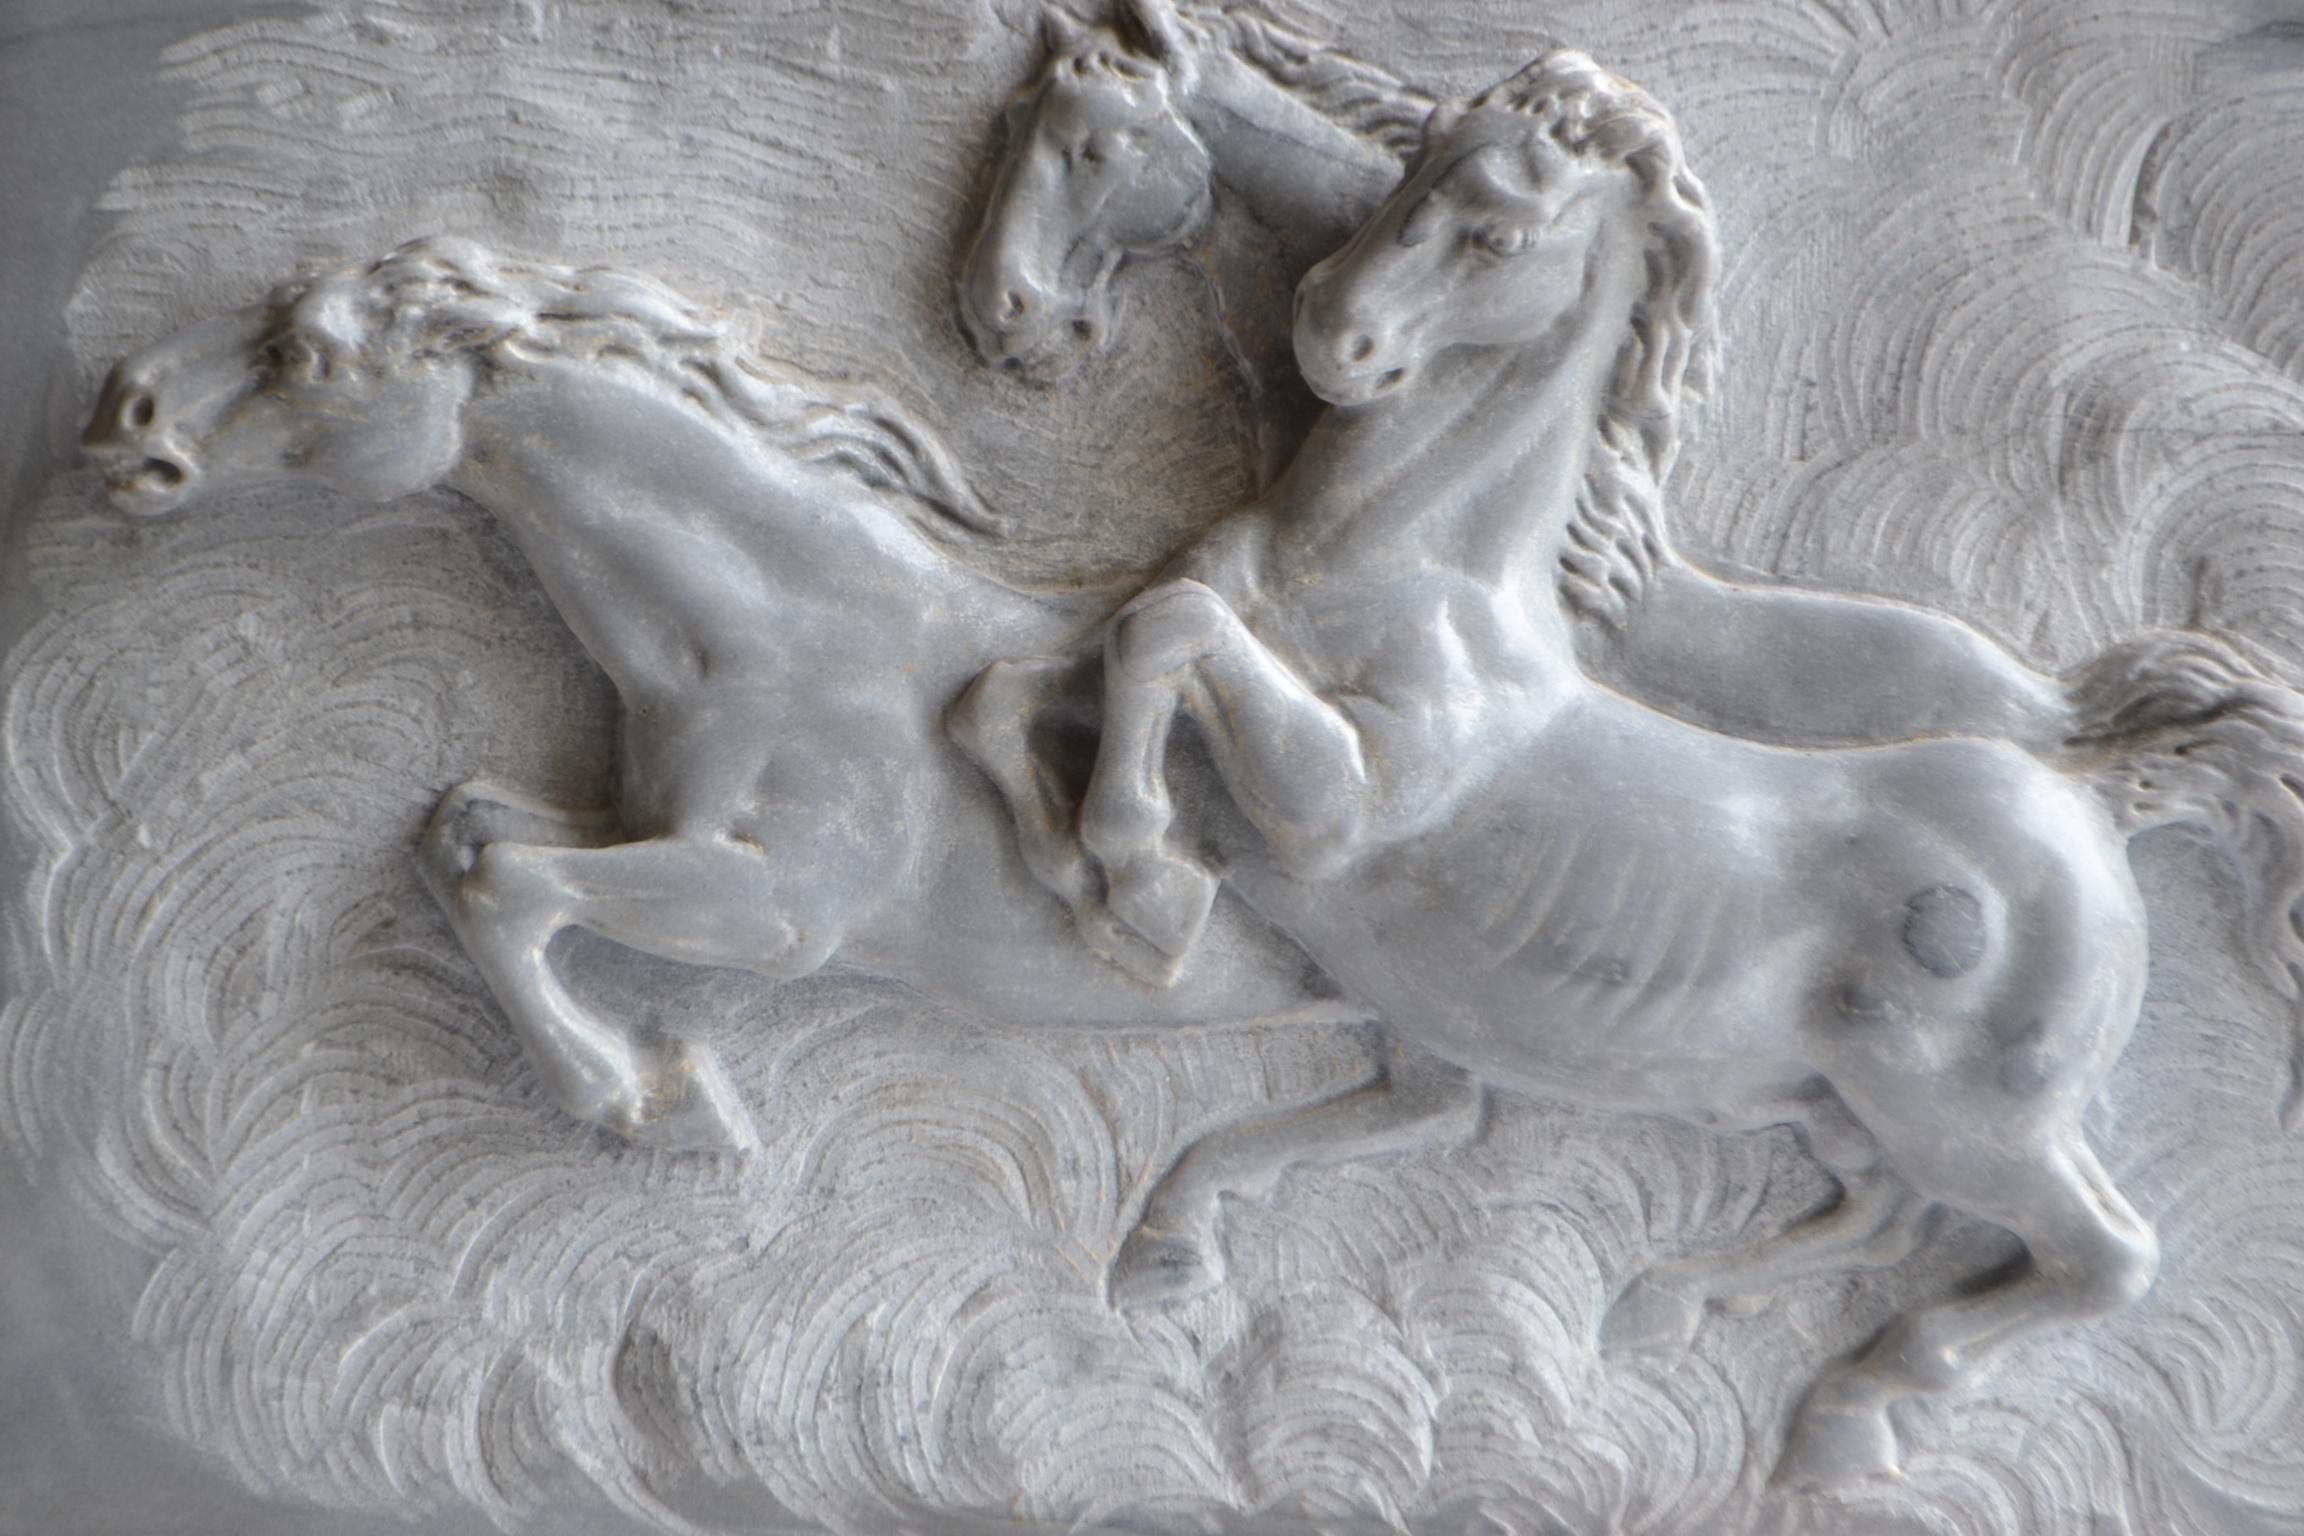 Horses, horse sculpture, marble horses, high relief horses, running horses, Italian art horses, made in Italy, bas-relief horses, high relief horse.
High relief representing a group of running horses.
carved on bardiglio gray marble from the Apuan